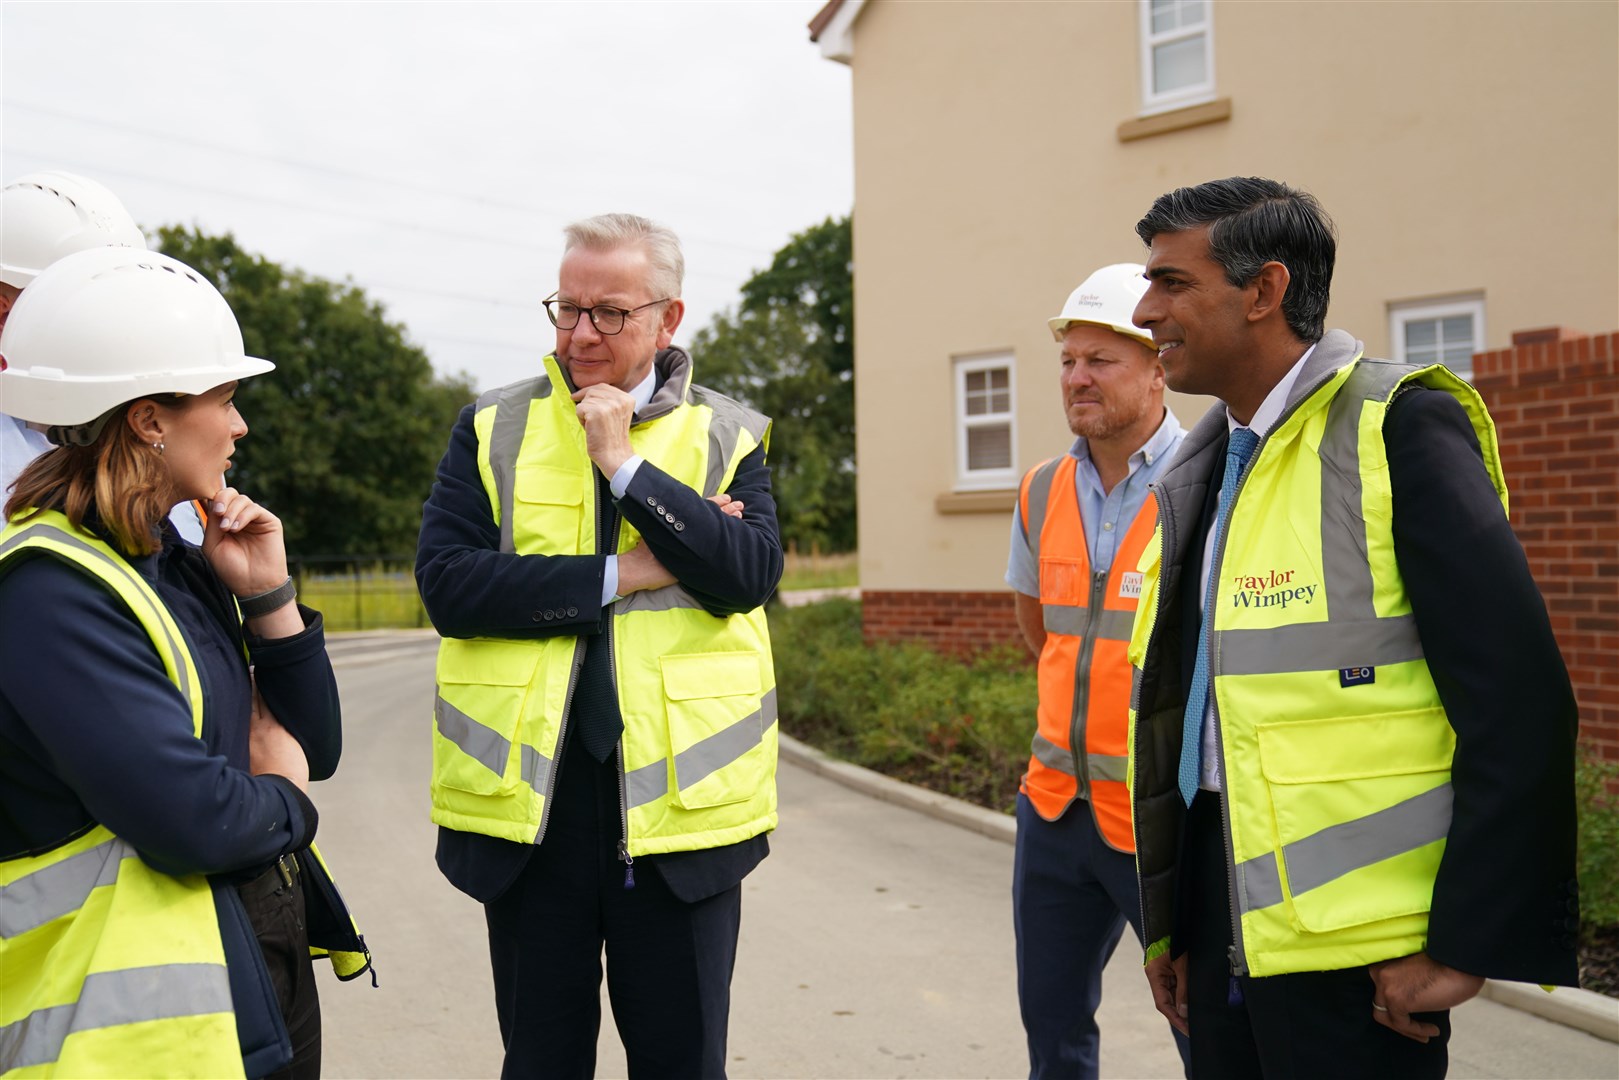 Rishi Sunak and Michael Gove speak to Ella Cole (left), trainee assistant site manager during a visit to the Taylor Wimpey Heather Gardens housing development in Norwich (Joe Giddens/PA)